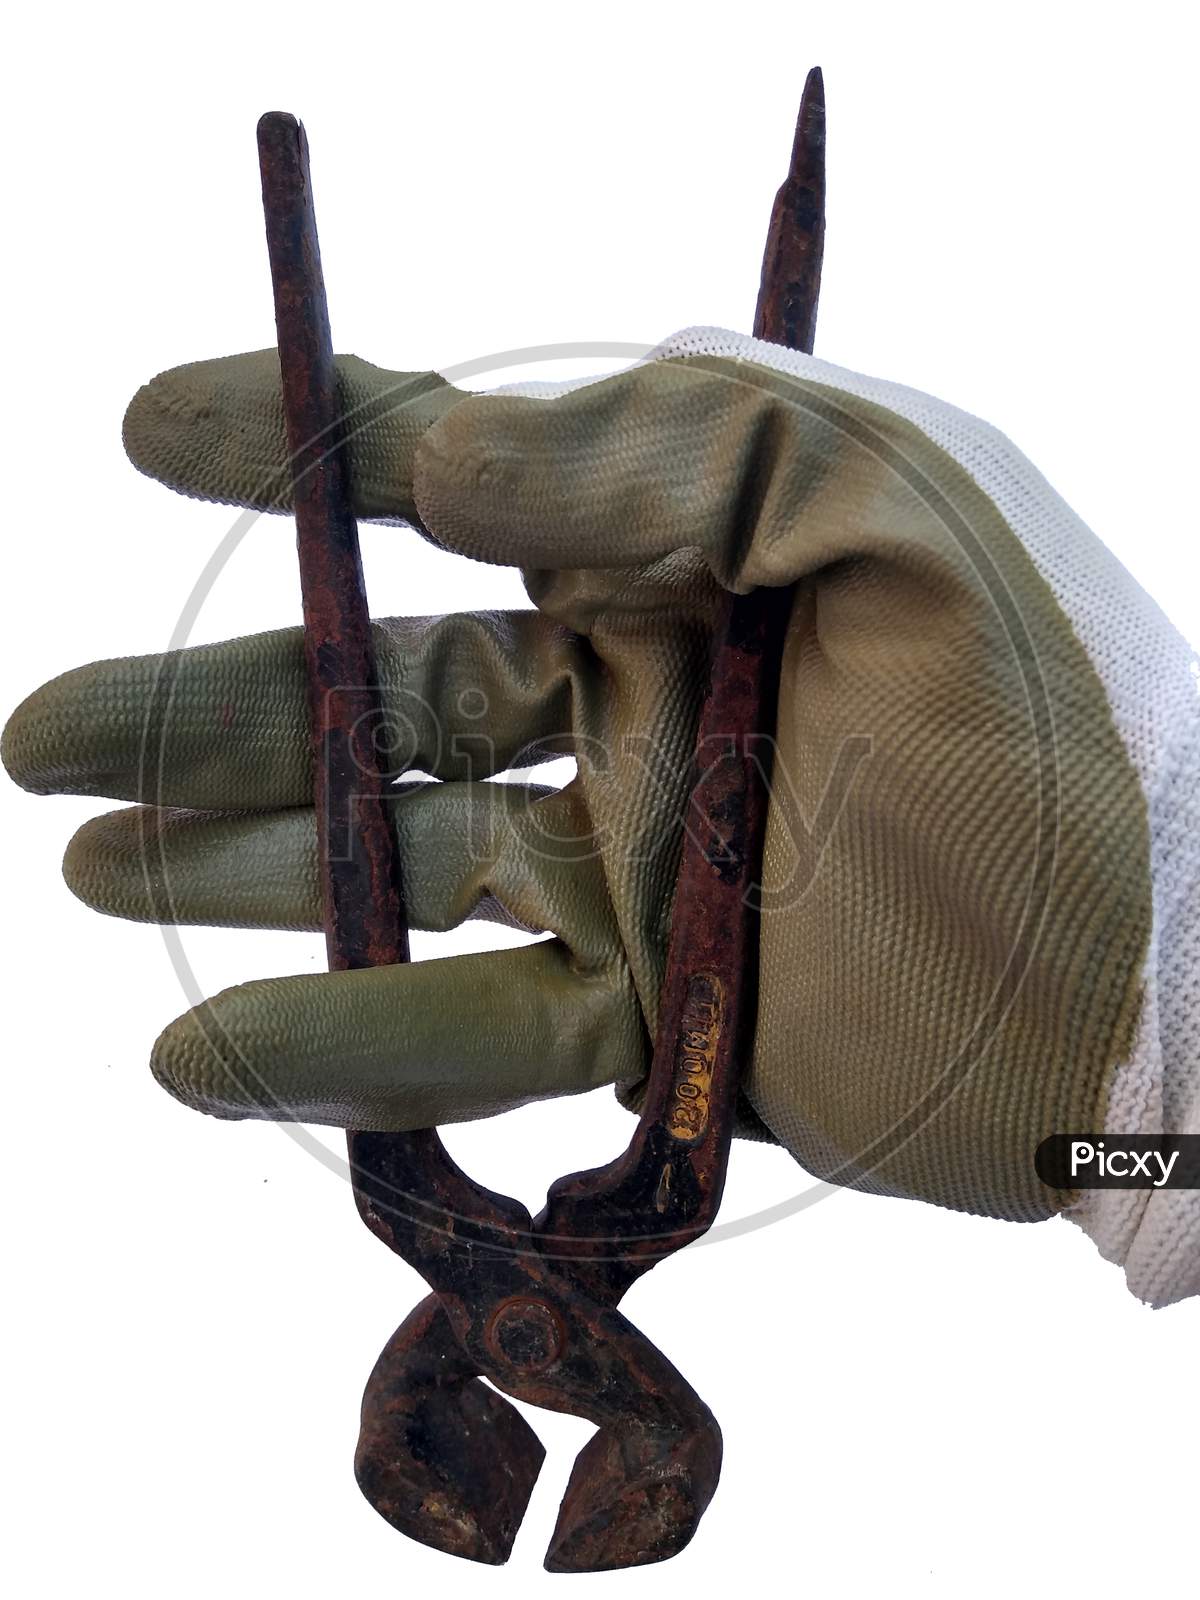 Hand With Protection Gloves Holding To The Plier On White Background.